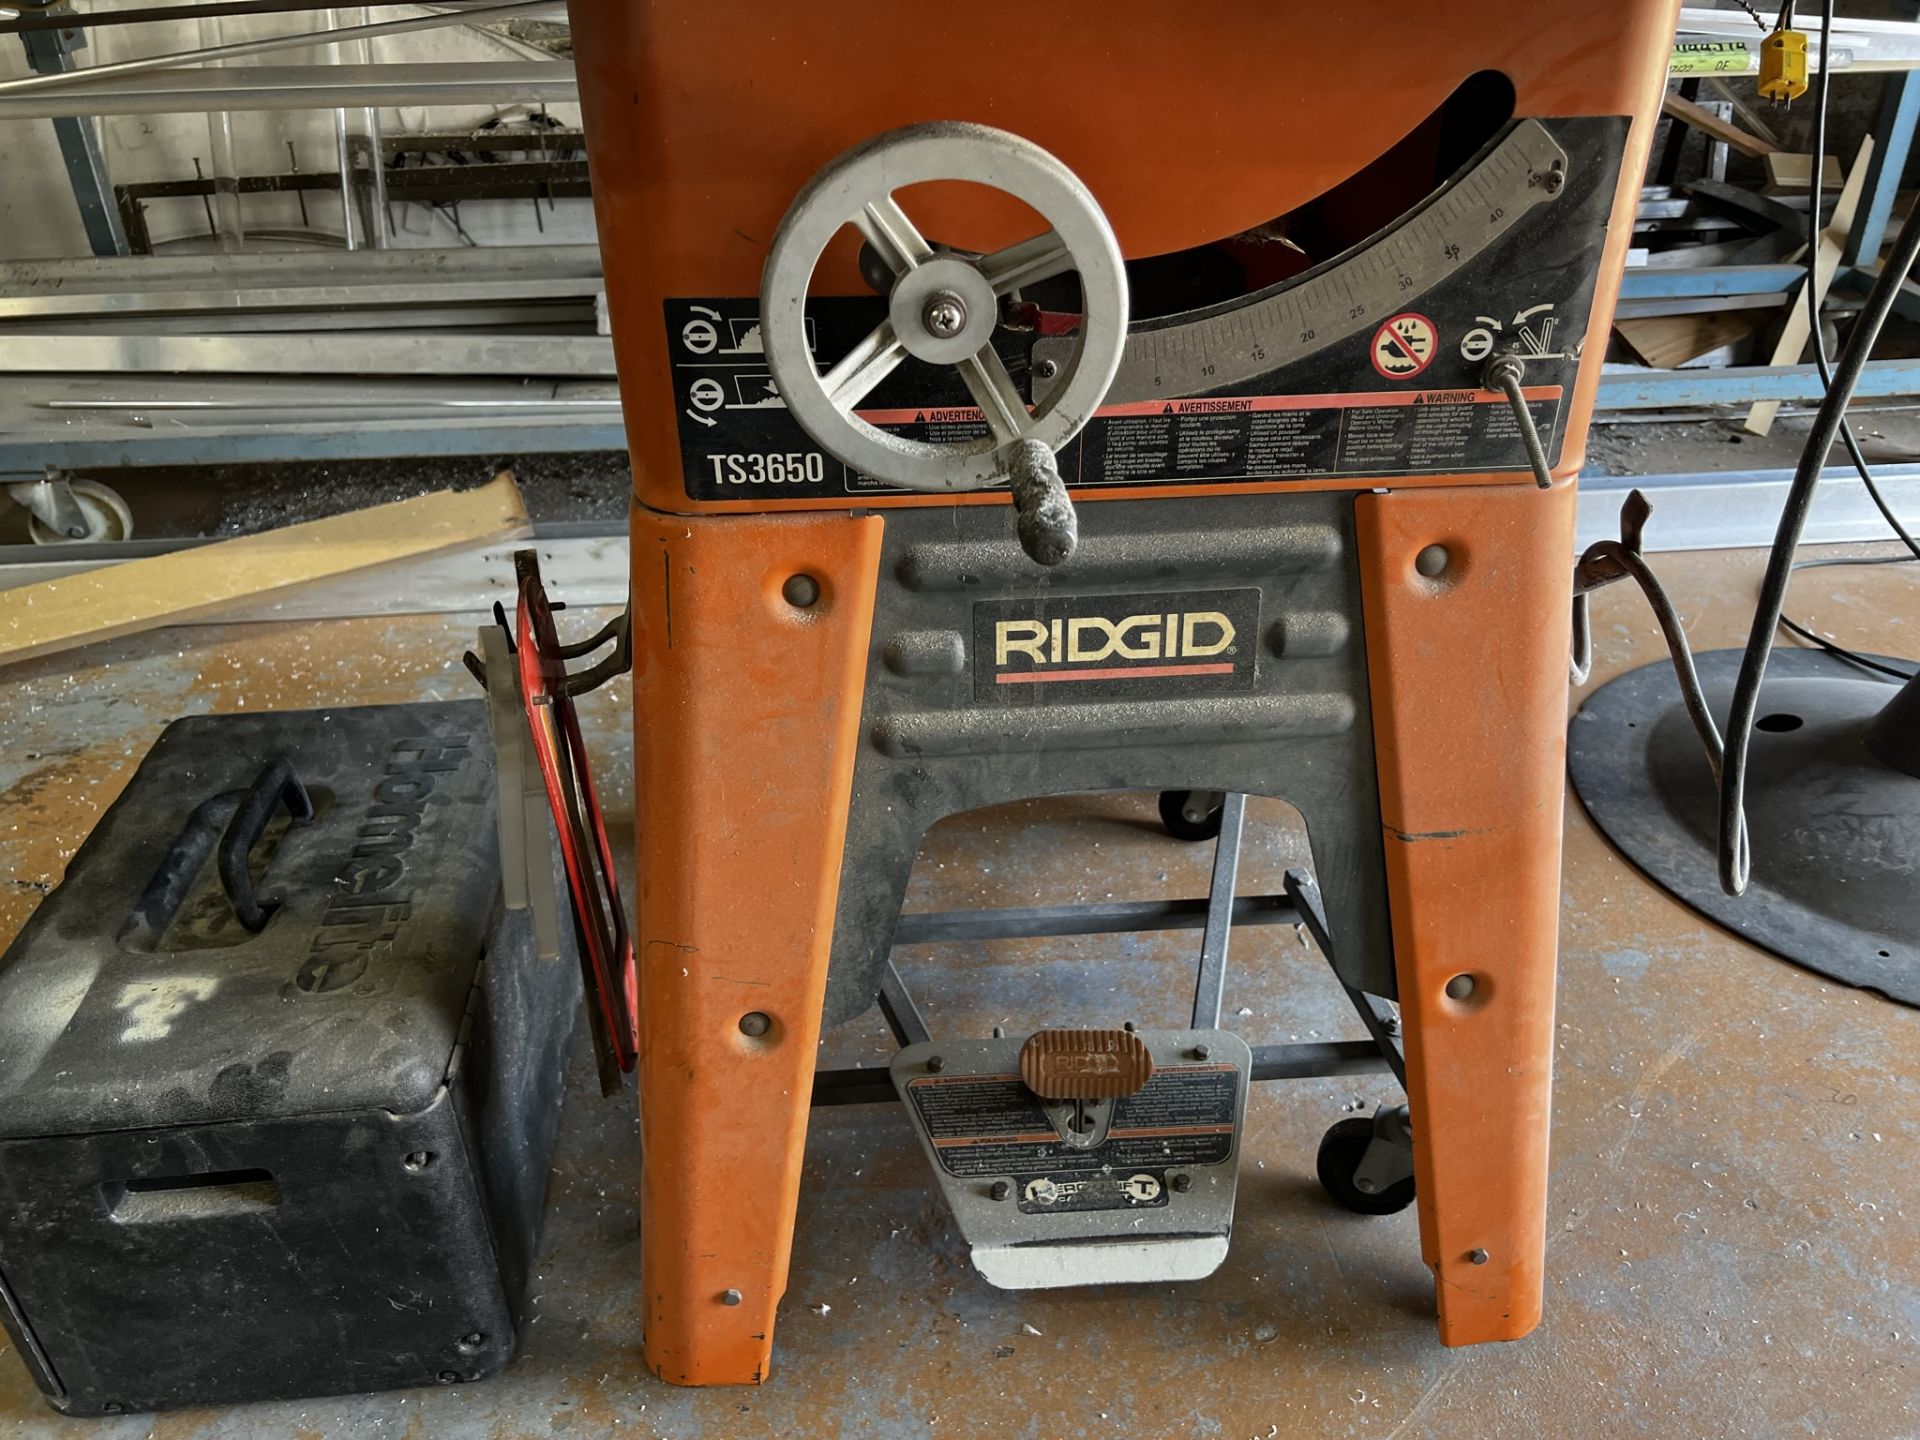 RIGID TS3650 CAST IRON TABLE SAW - 10'' (LOCATED IN WEST PALM BEACH, FL) - Image 2 of 3